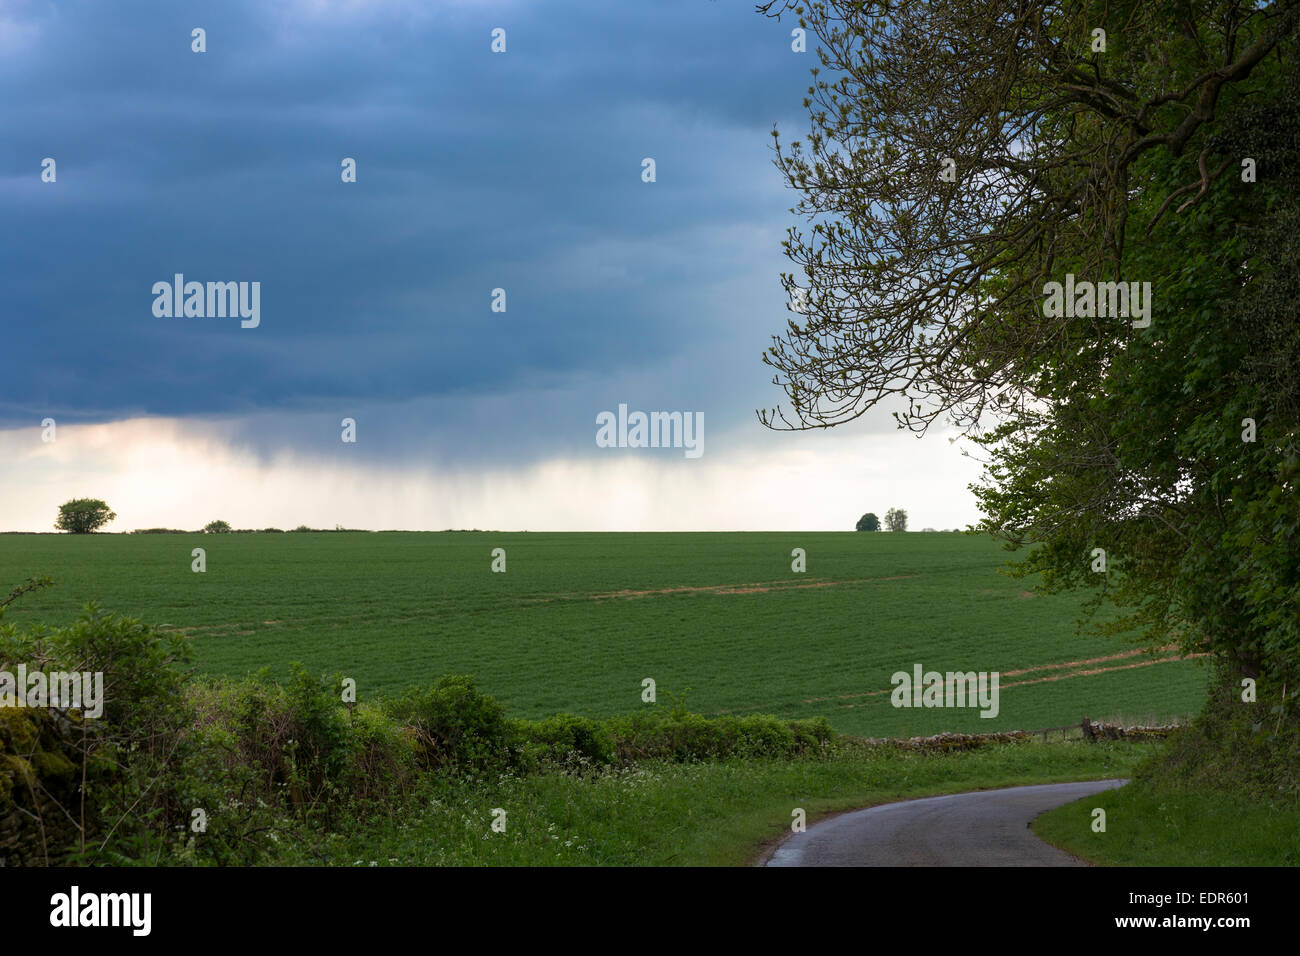 Dark stormy leaden sky with rain cloud forecasts inclement bad weather in Swinbrook in The Cotswolds, Oxfordshire, UK Stock Photo